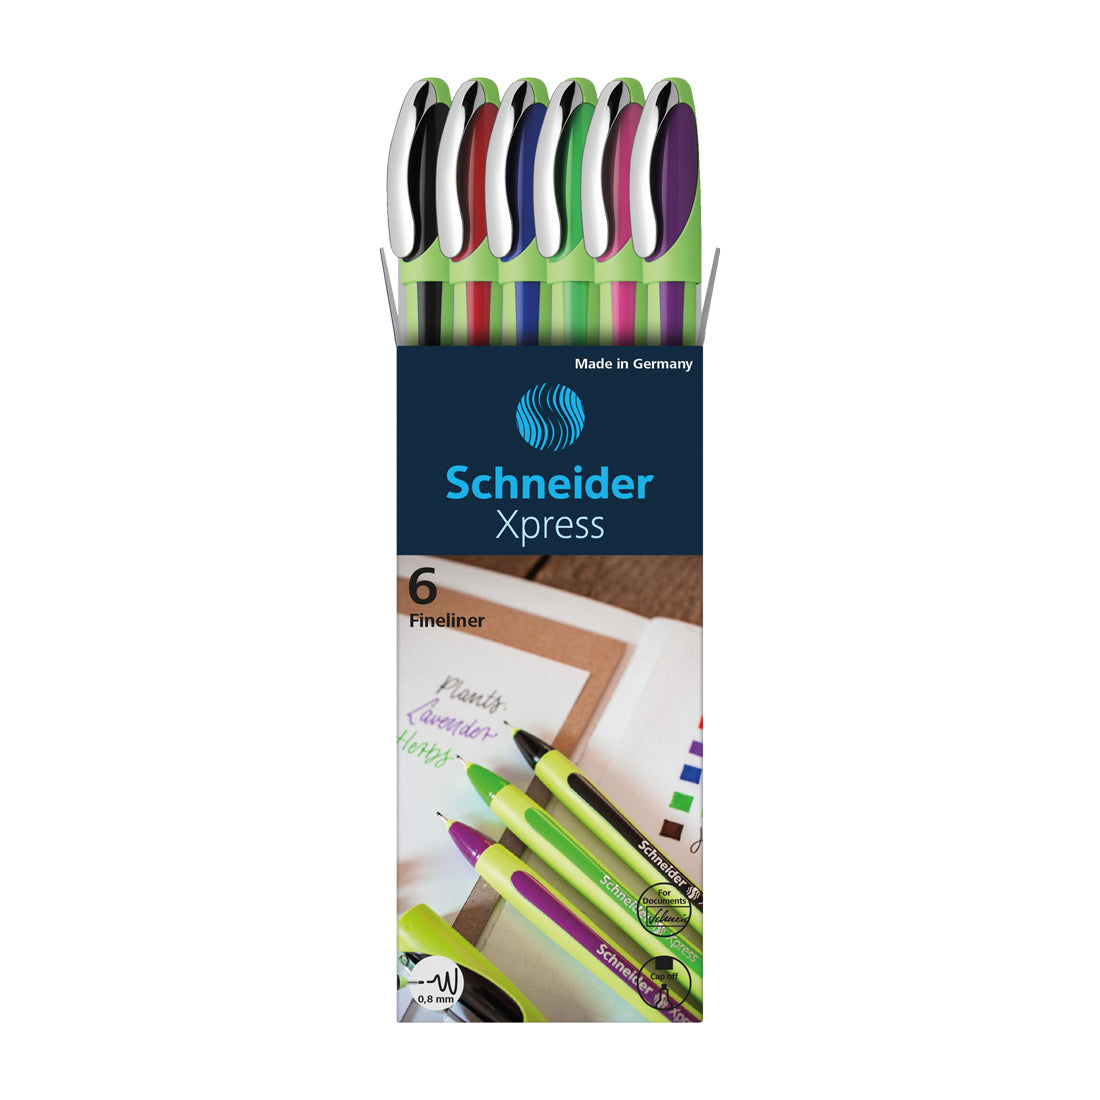 Xpress Fineliners 0.8mm, Box of 6, Assorted